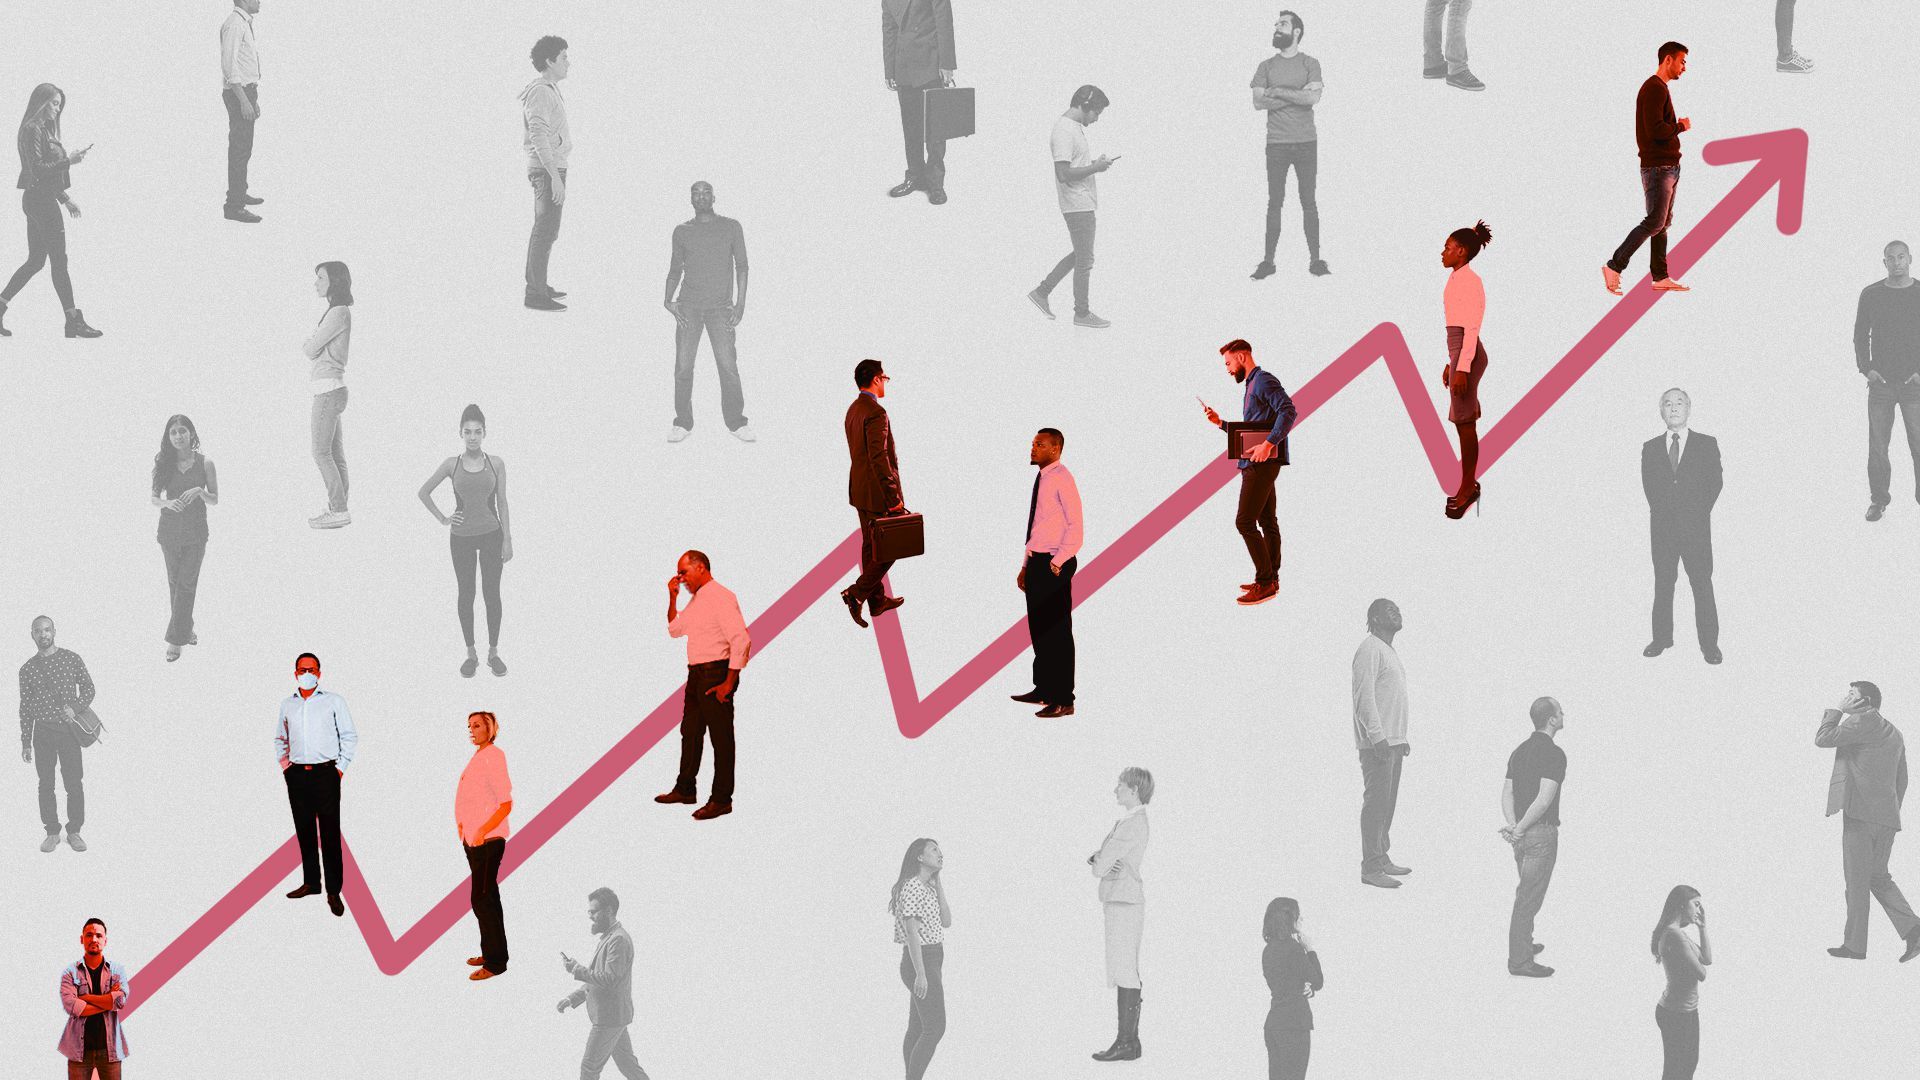 Illustration of an upward trend line over a group of people, with others in the background grayed out